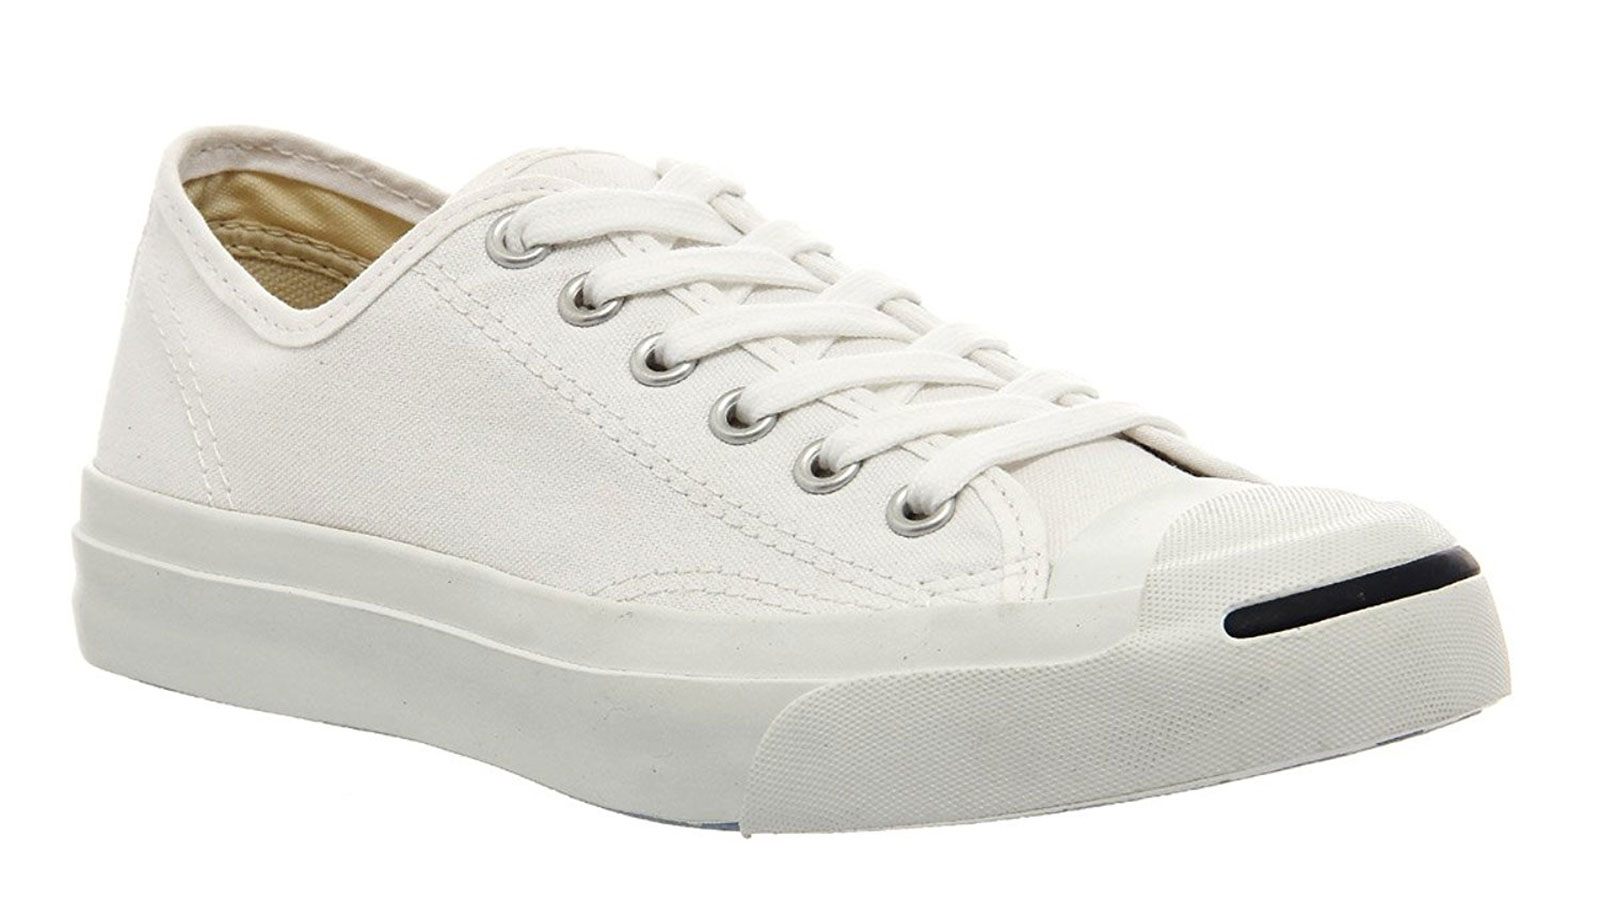 Converse Jack Purcell Signature White Sneakers | best men's white sneakers